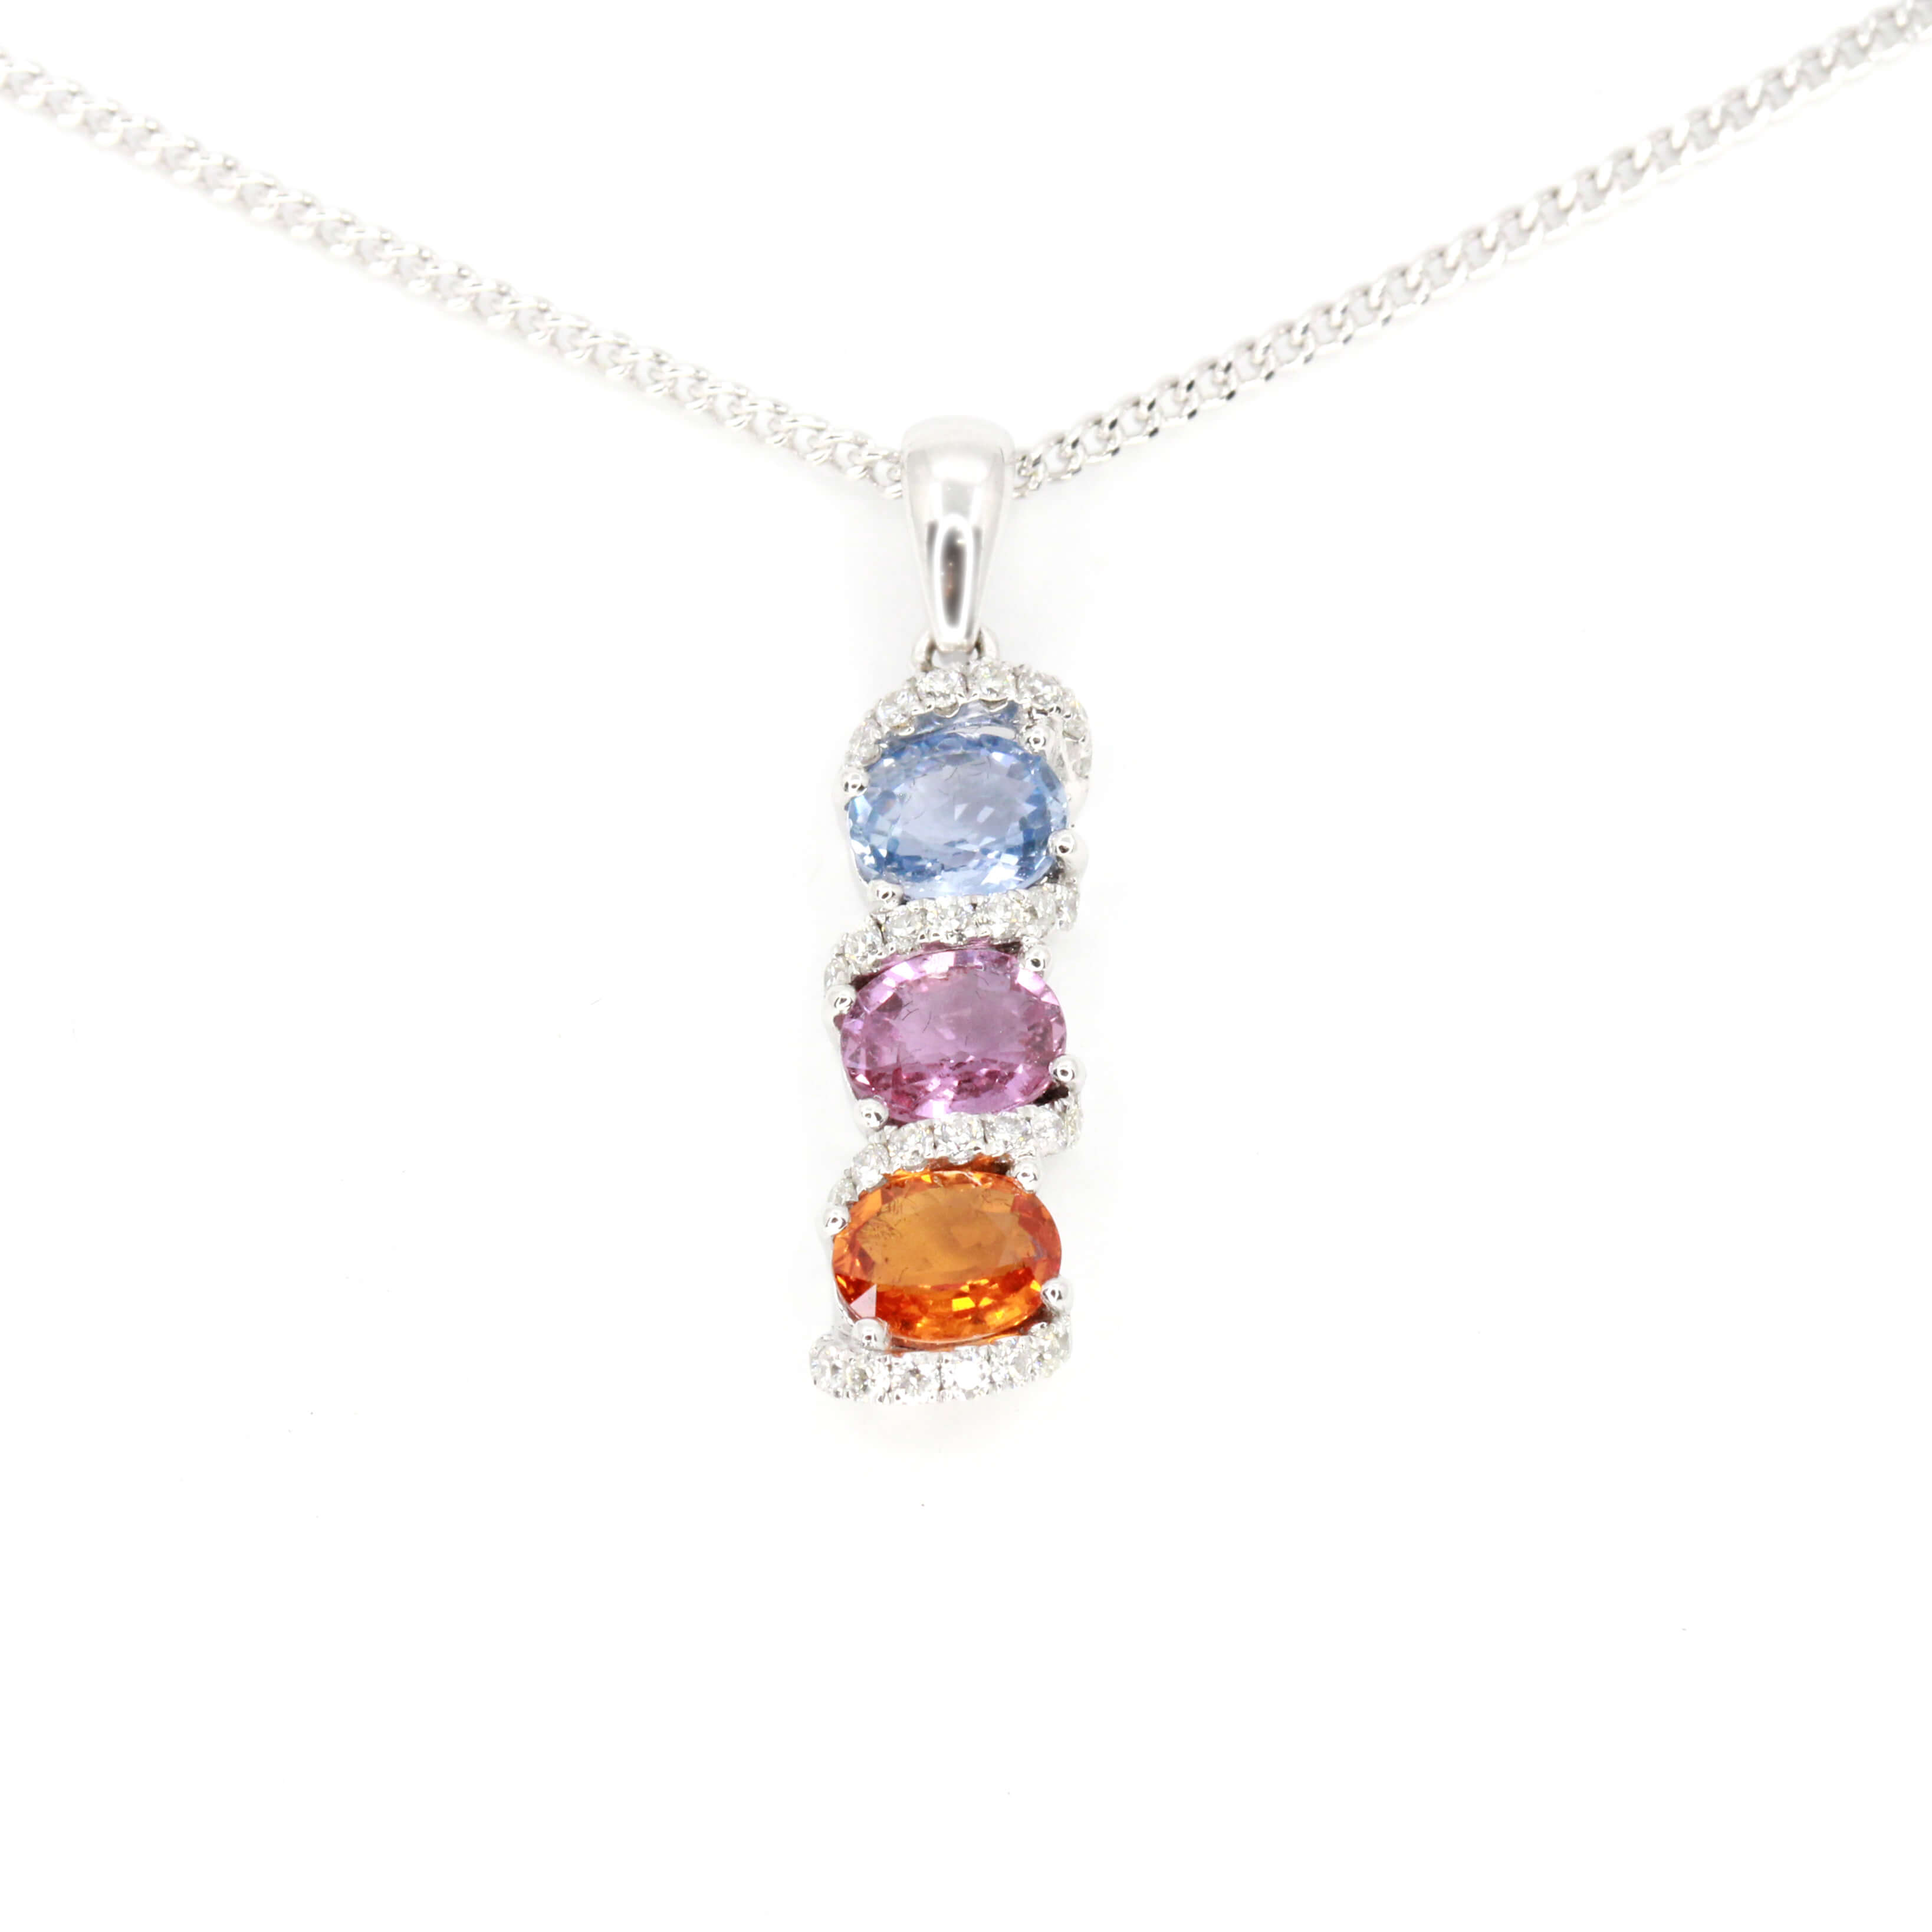 Oval Blue, Pink, Orange Sapphire Pendant with Diamonds set in 18ct White Gold